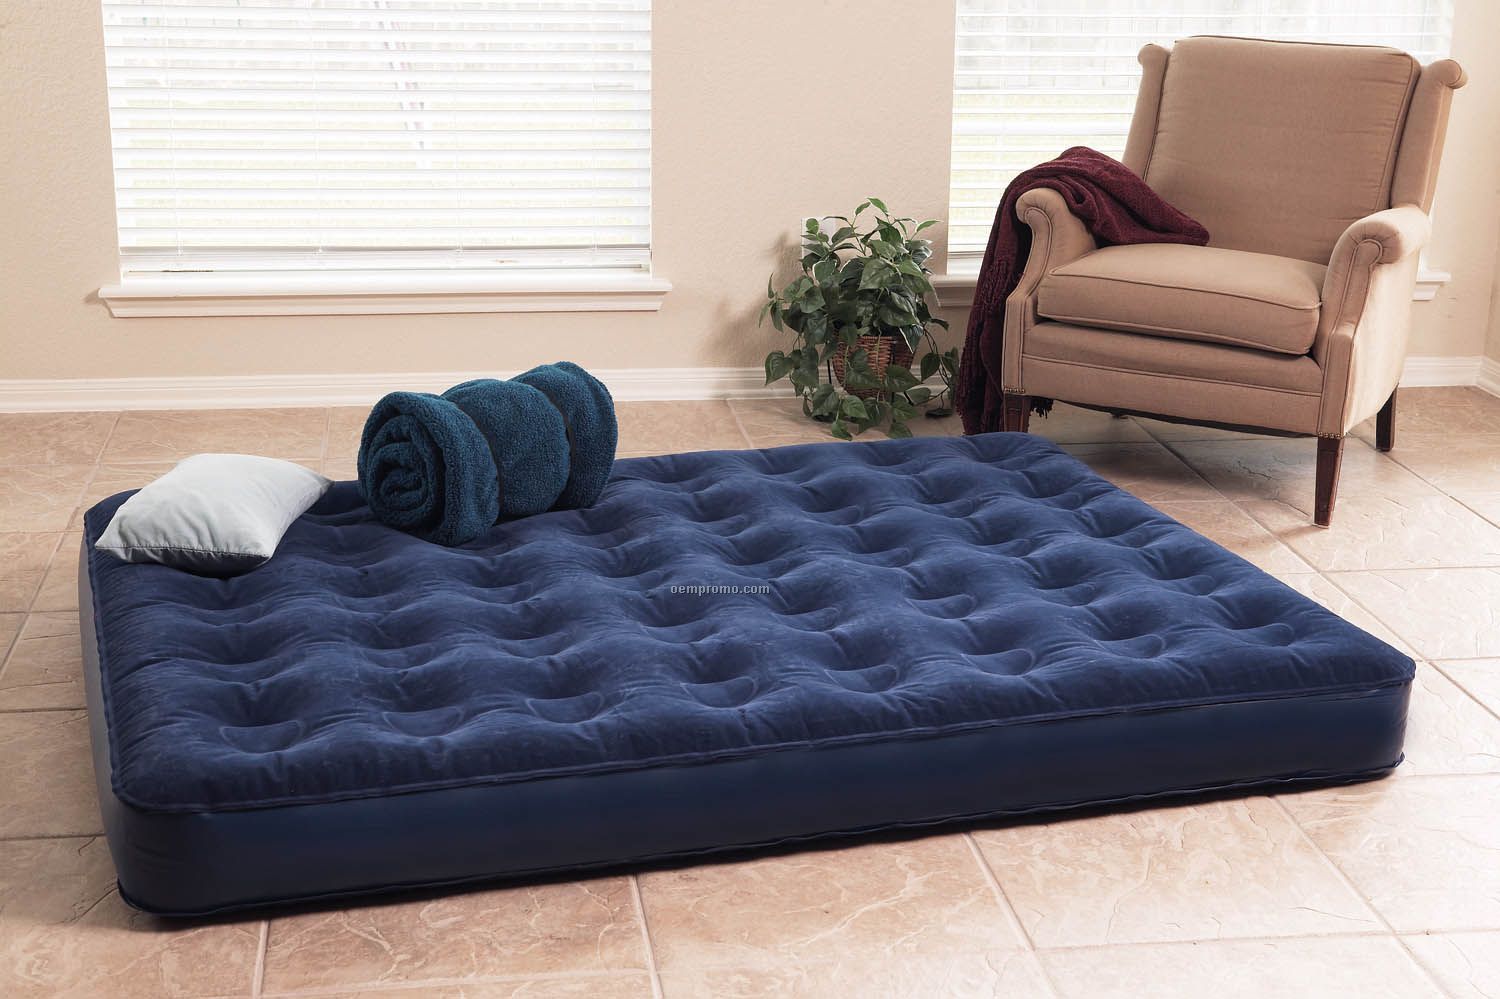 Texsport Deluxe Air Beds With Built In Battery Pump, Queen